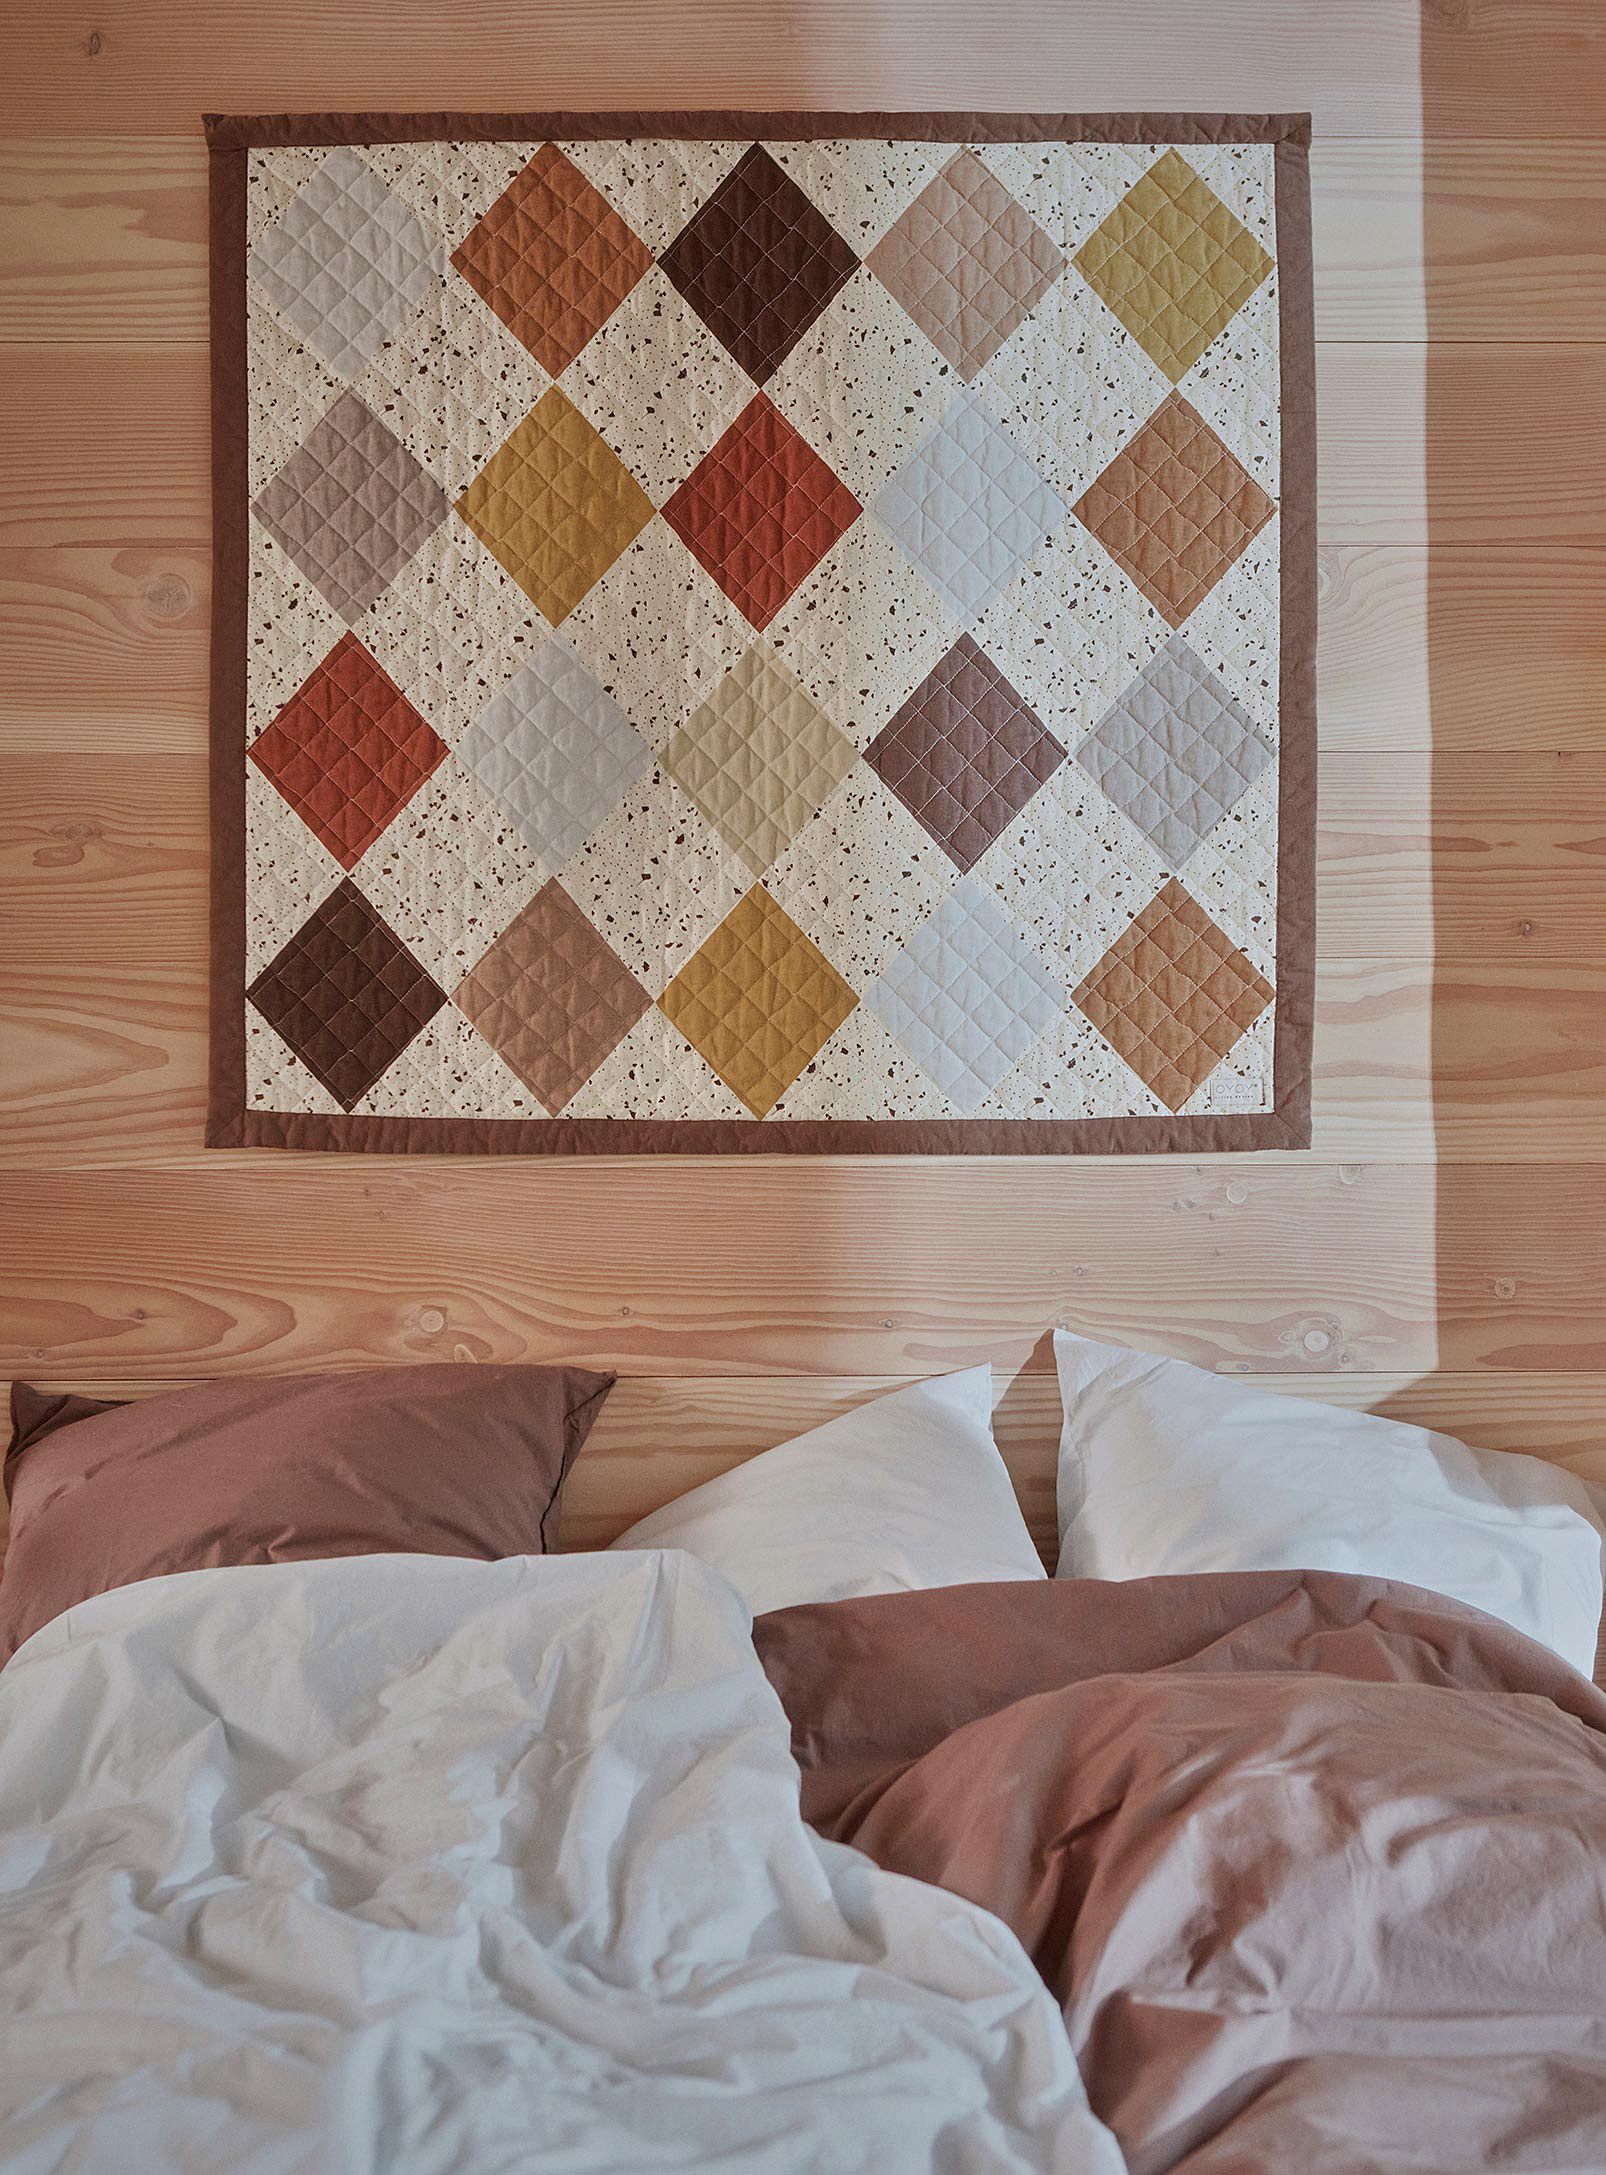 Oyoy Living Design Geometric Wall Quilt In Assorted